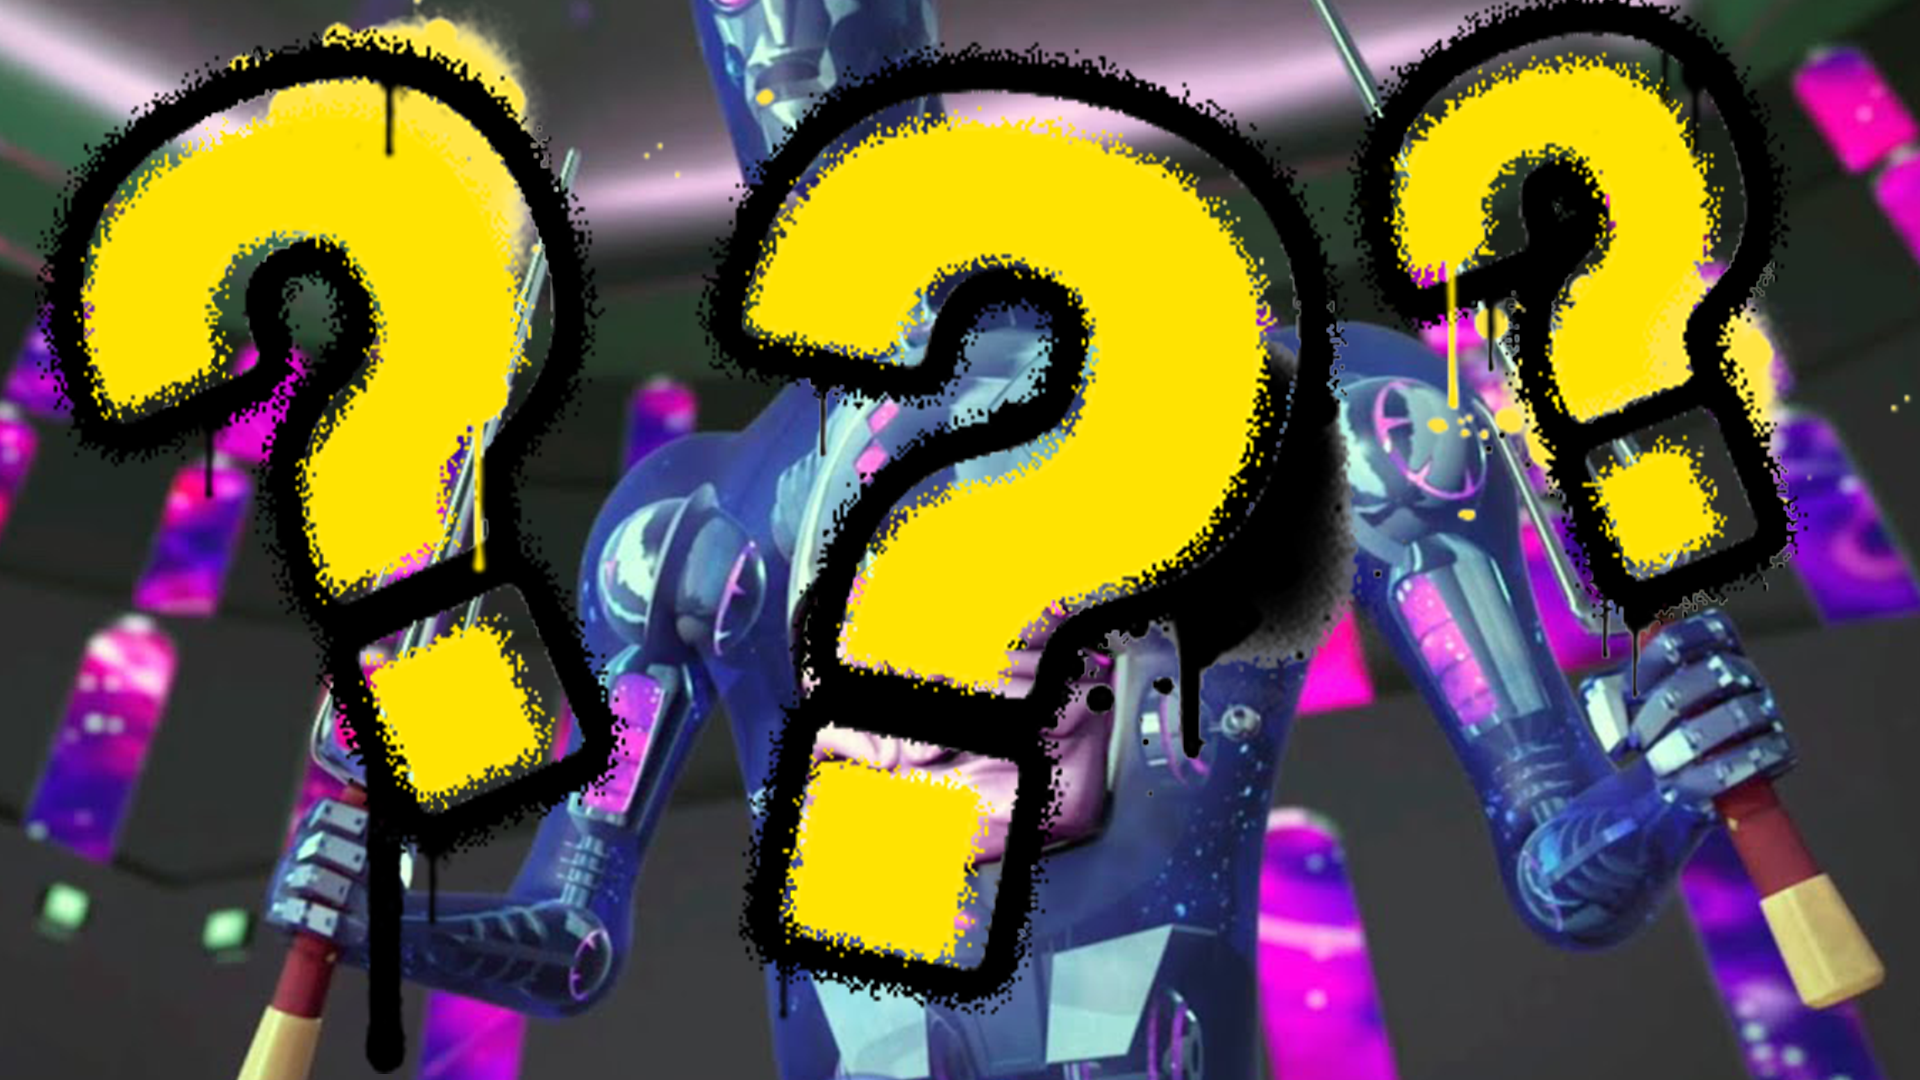 Mysterious villain with question marks over them